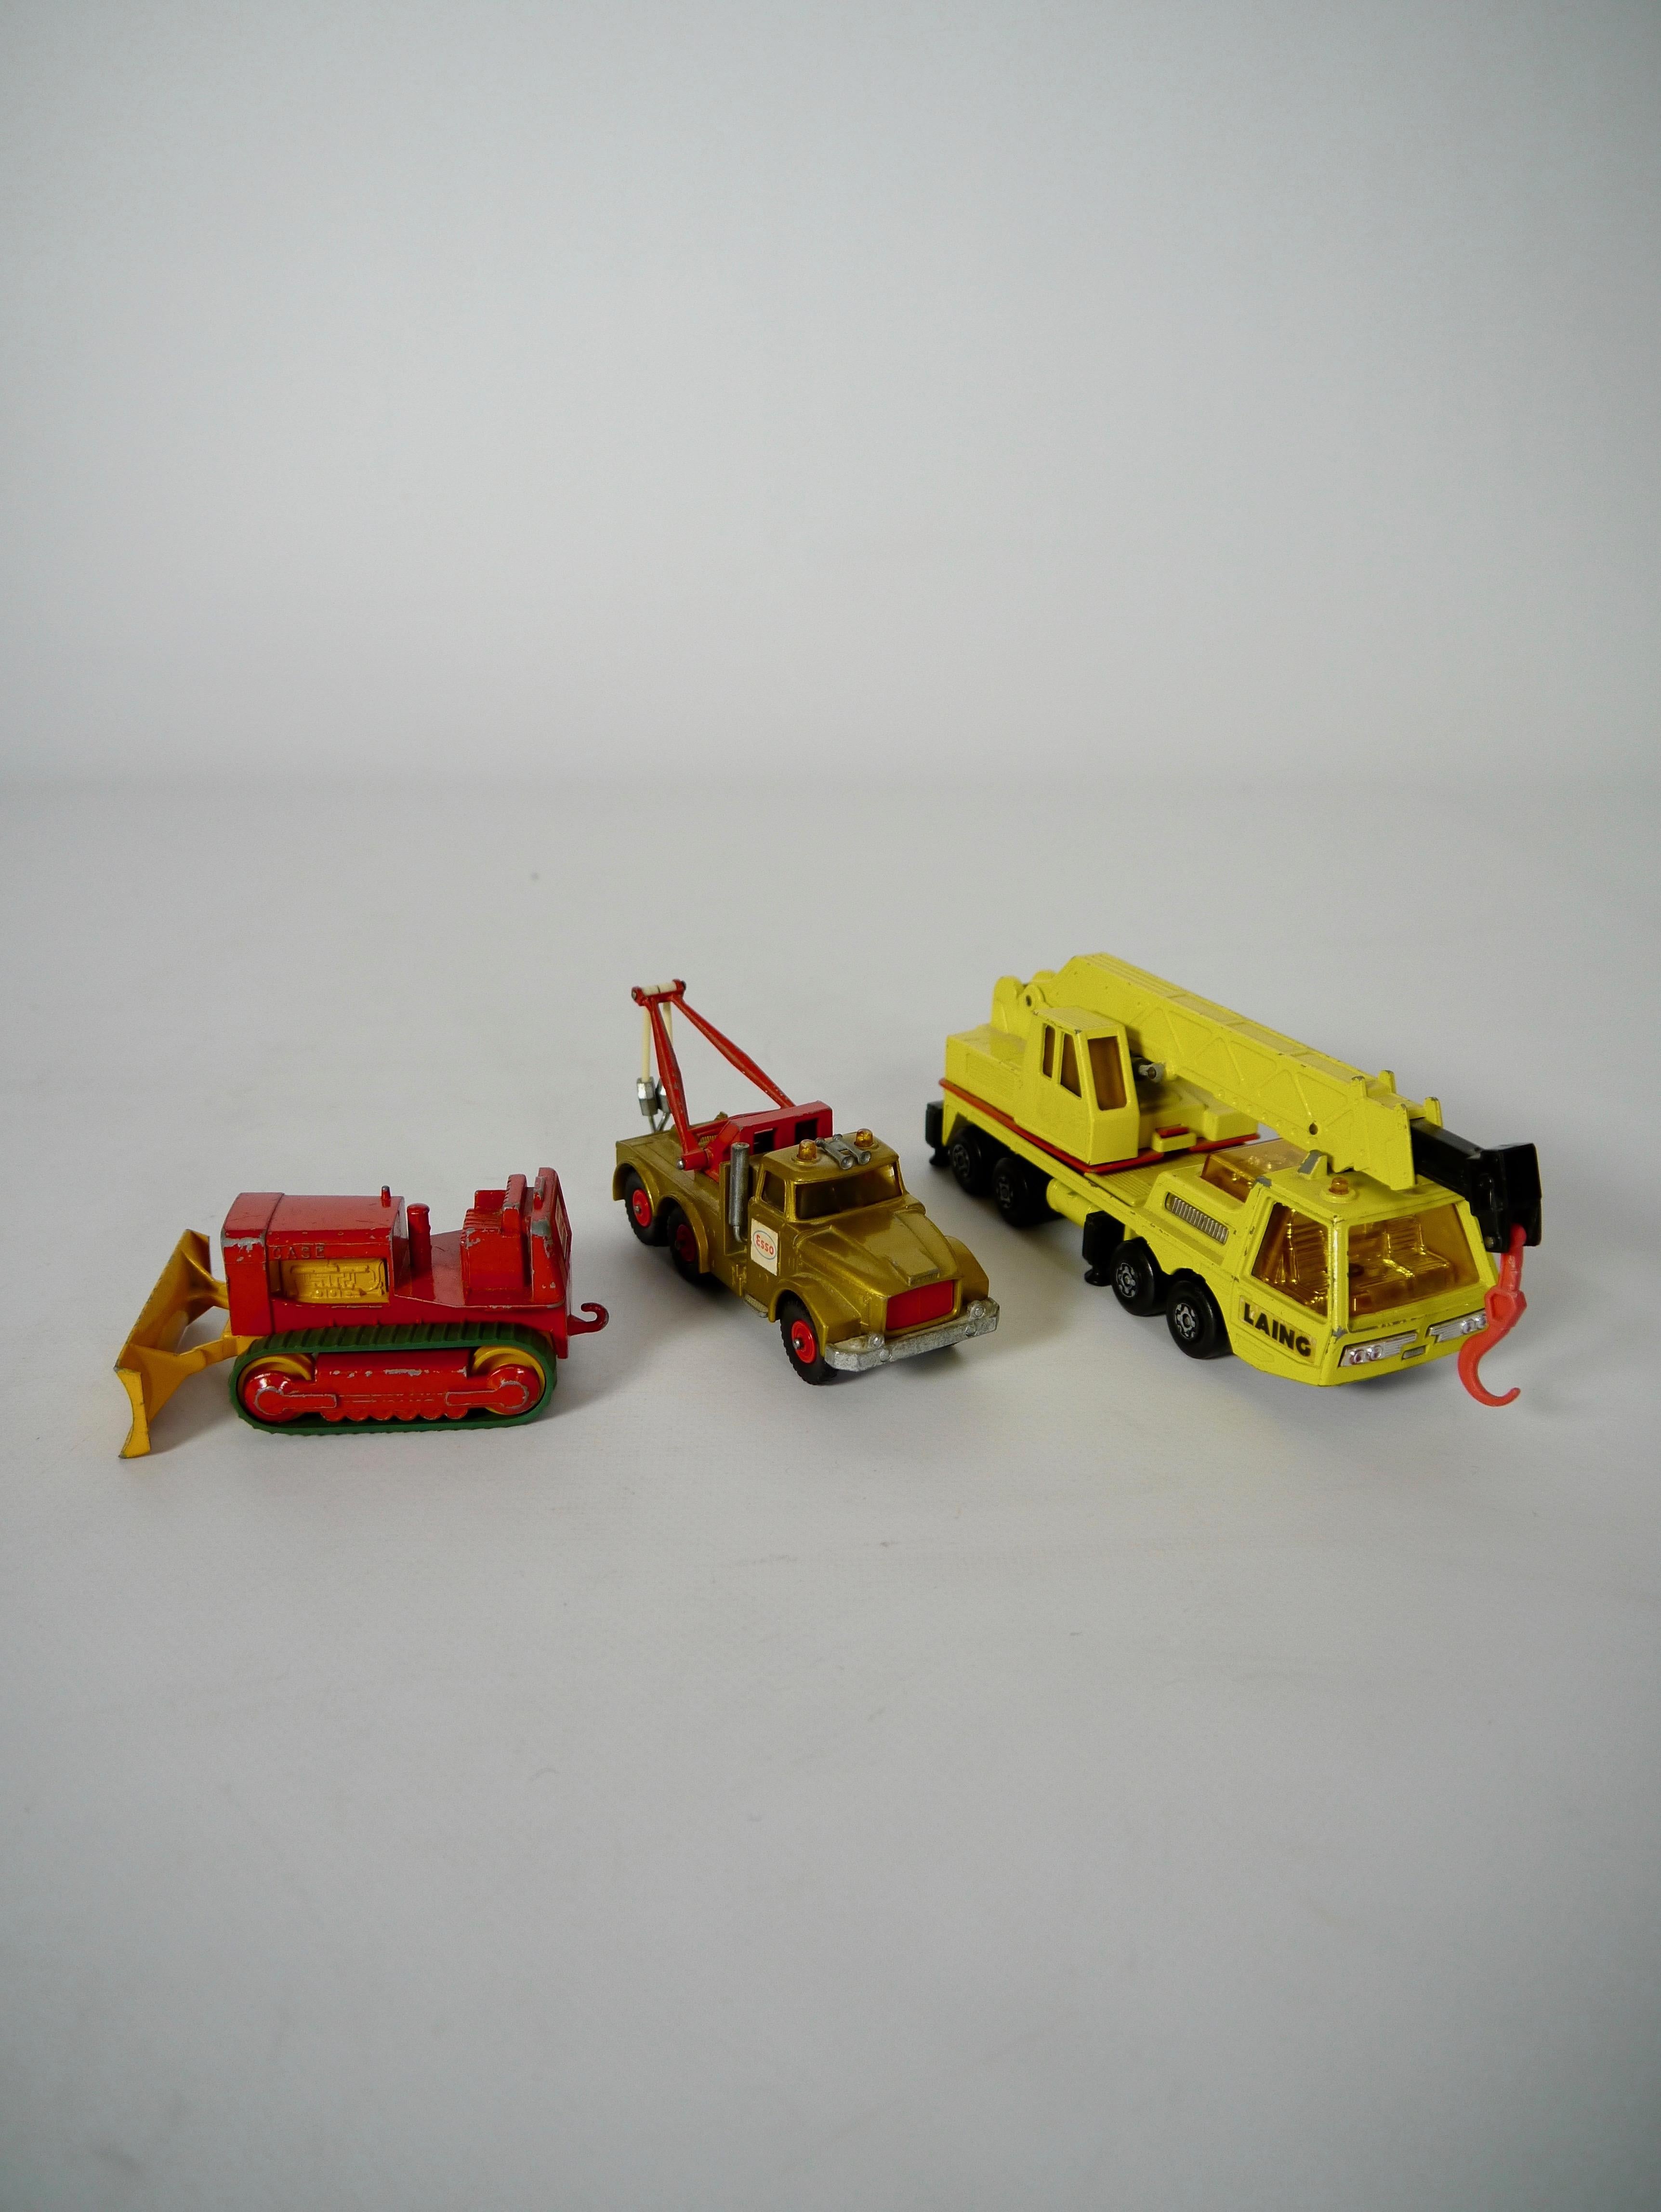 Three matchbox construction machine toys; Scammel Heavy Wreck Truck, K12 Hercules Mobile Crane & Case Tractor. All made by Lesney in the 60s-70s. Very good condition.